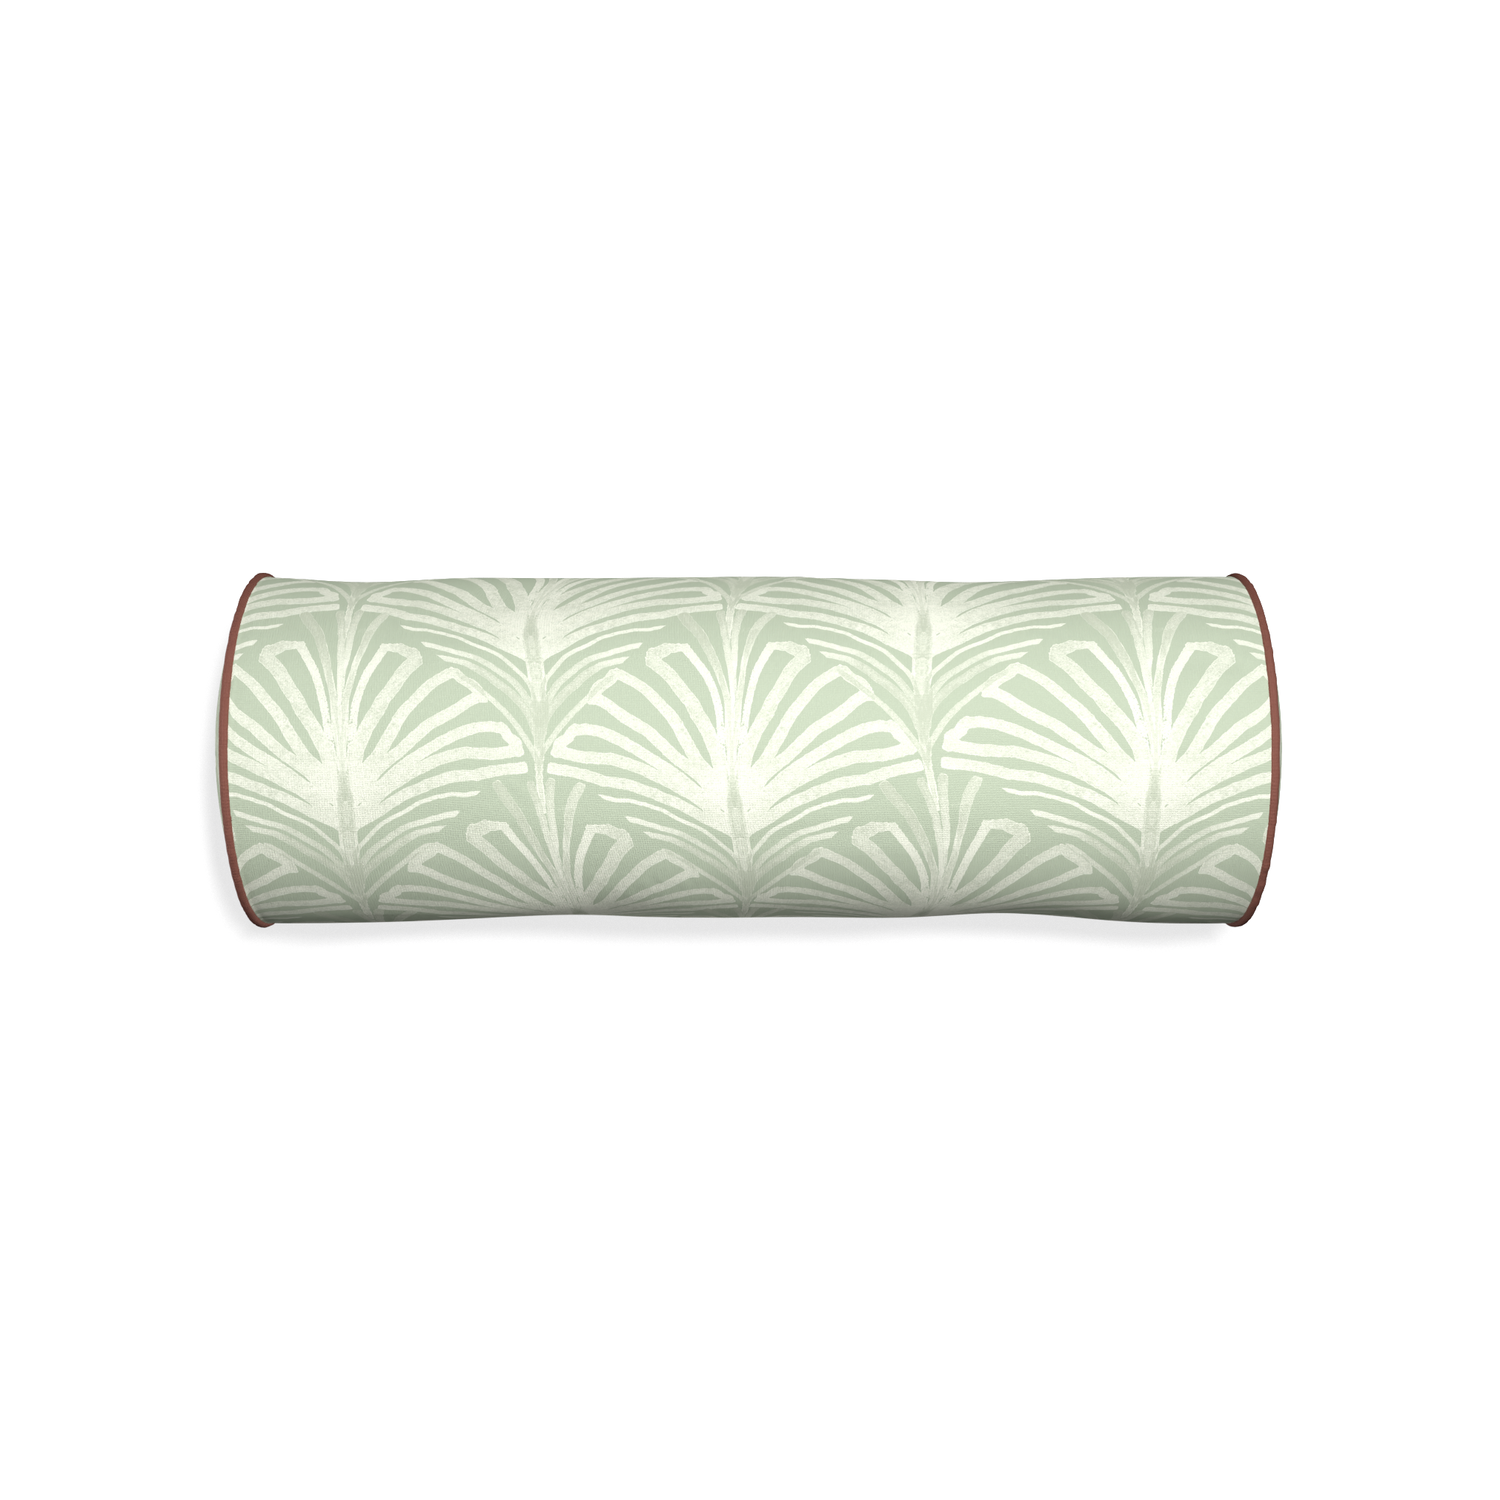 Bolster suzy sage custom sage green palmpillow with w piping on white background